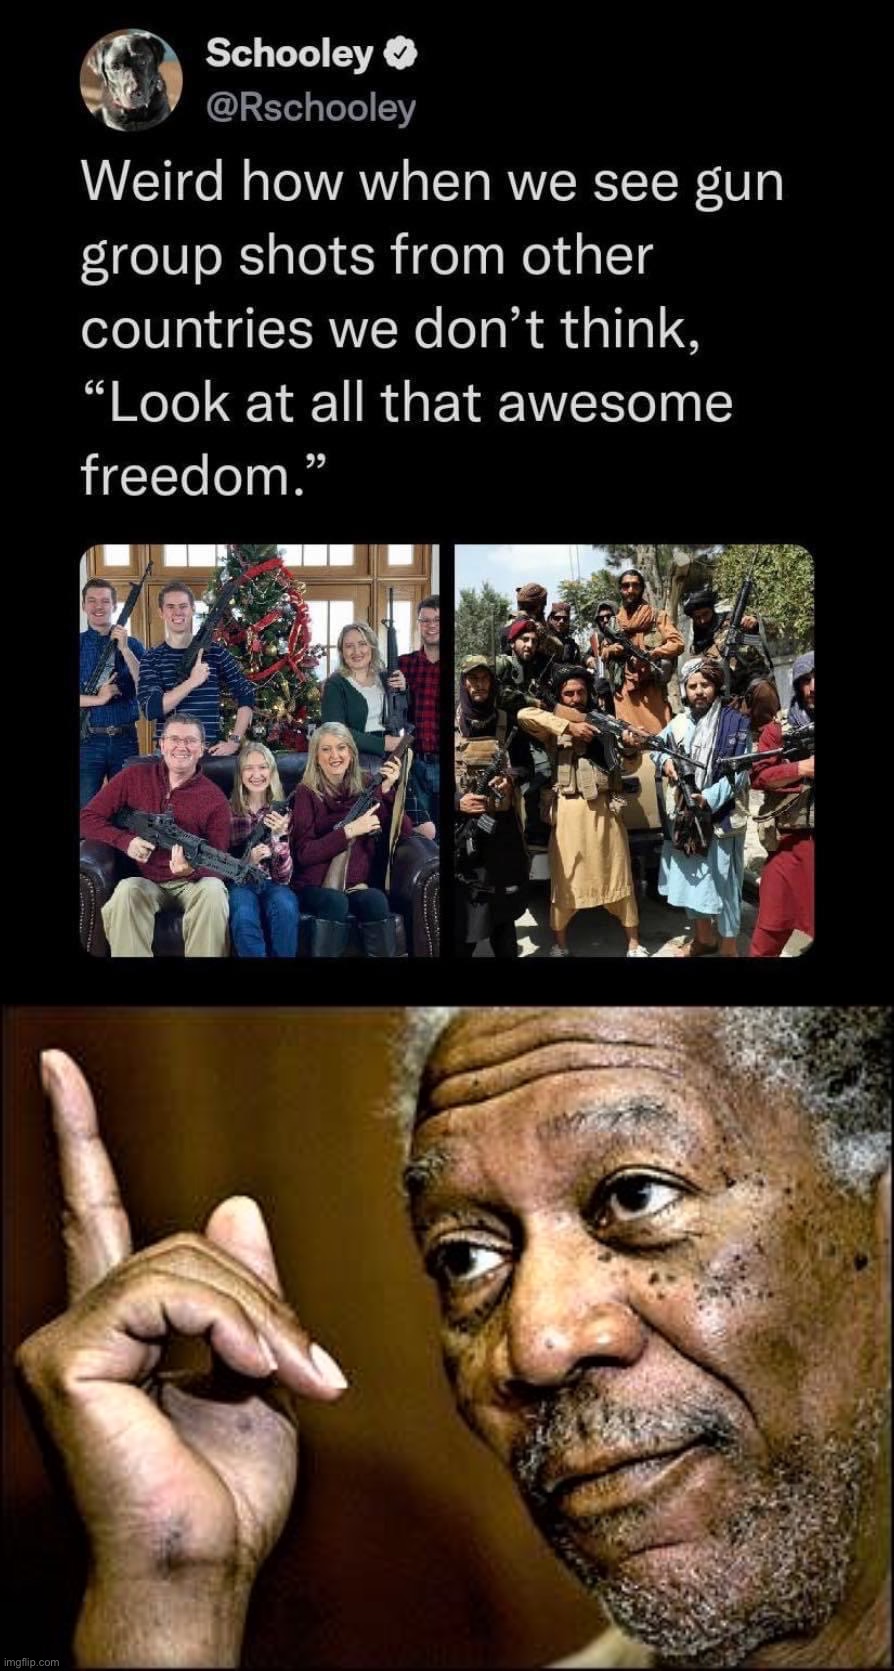 MAGA family: “We’re not the Taliban!” People: Are you sure about that? | image tagged in christmas gun pose vs taliban,morgan freeman this hq,taliban,maga,conservative hypocrisy,conservative logic | made w/ Imgflip meme maker